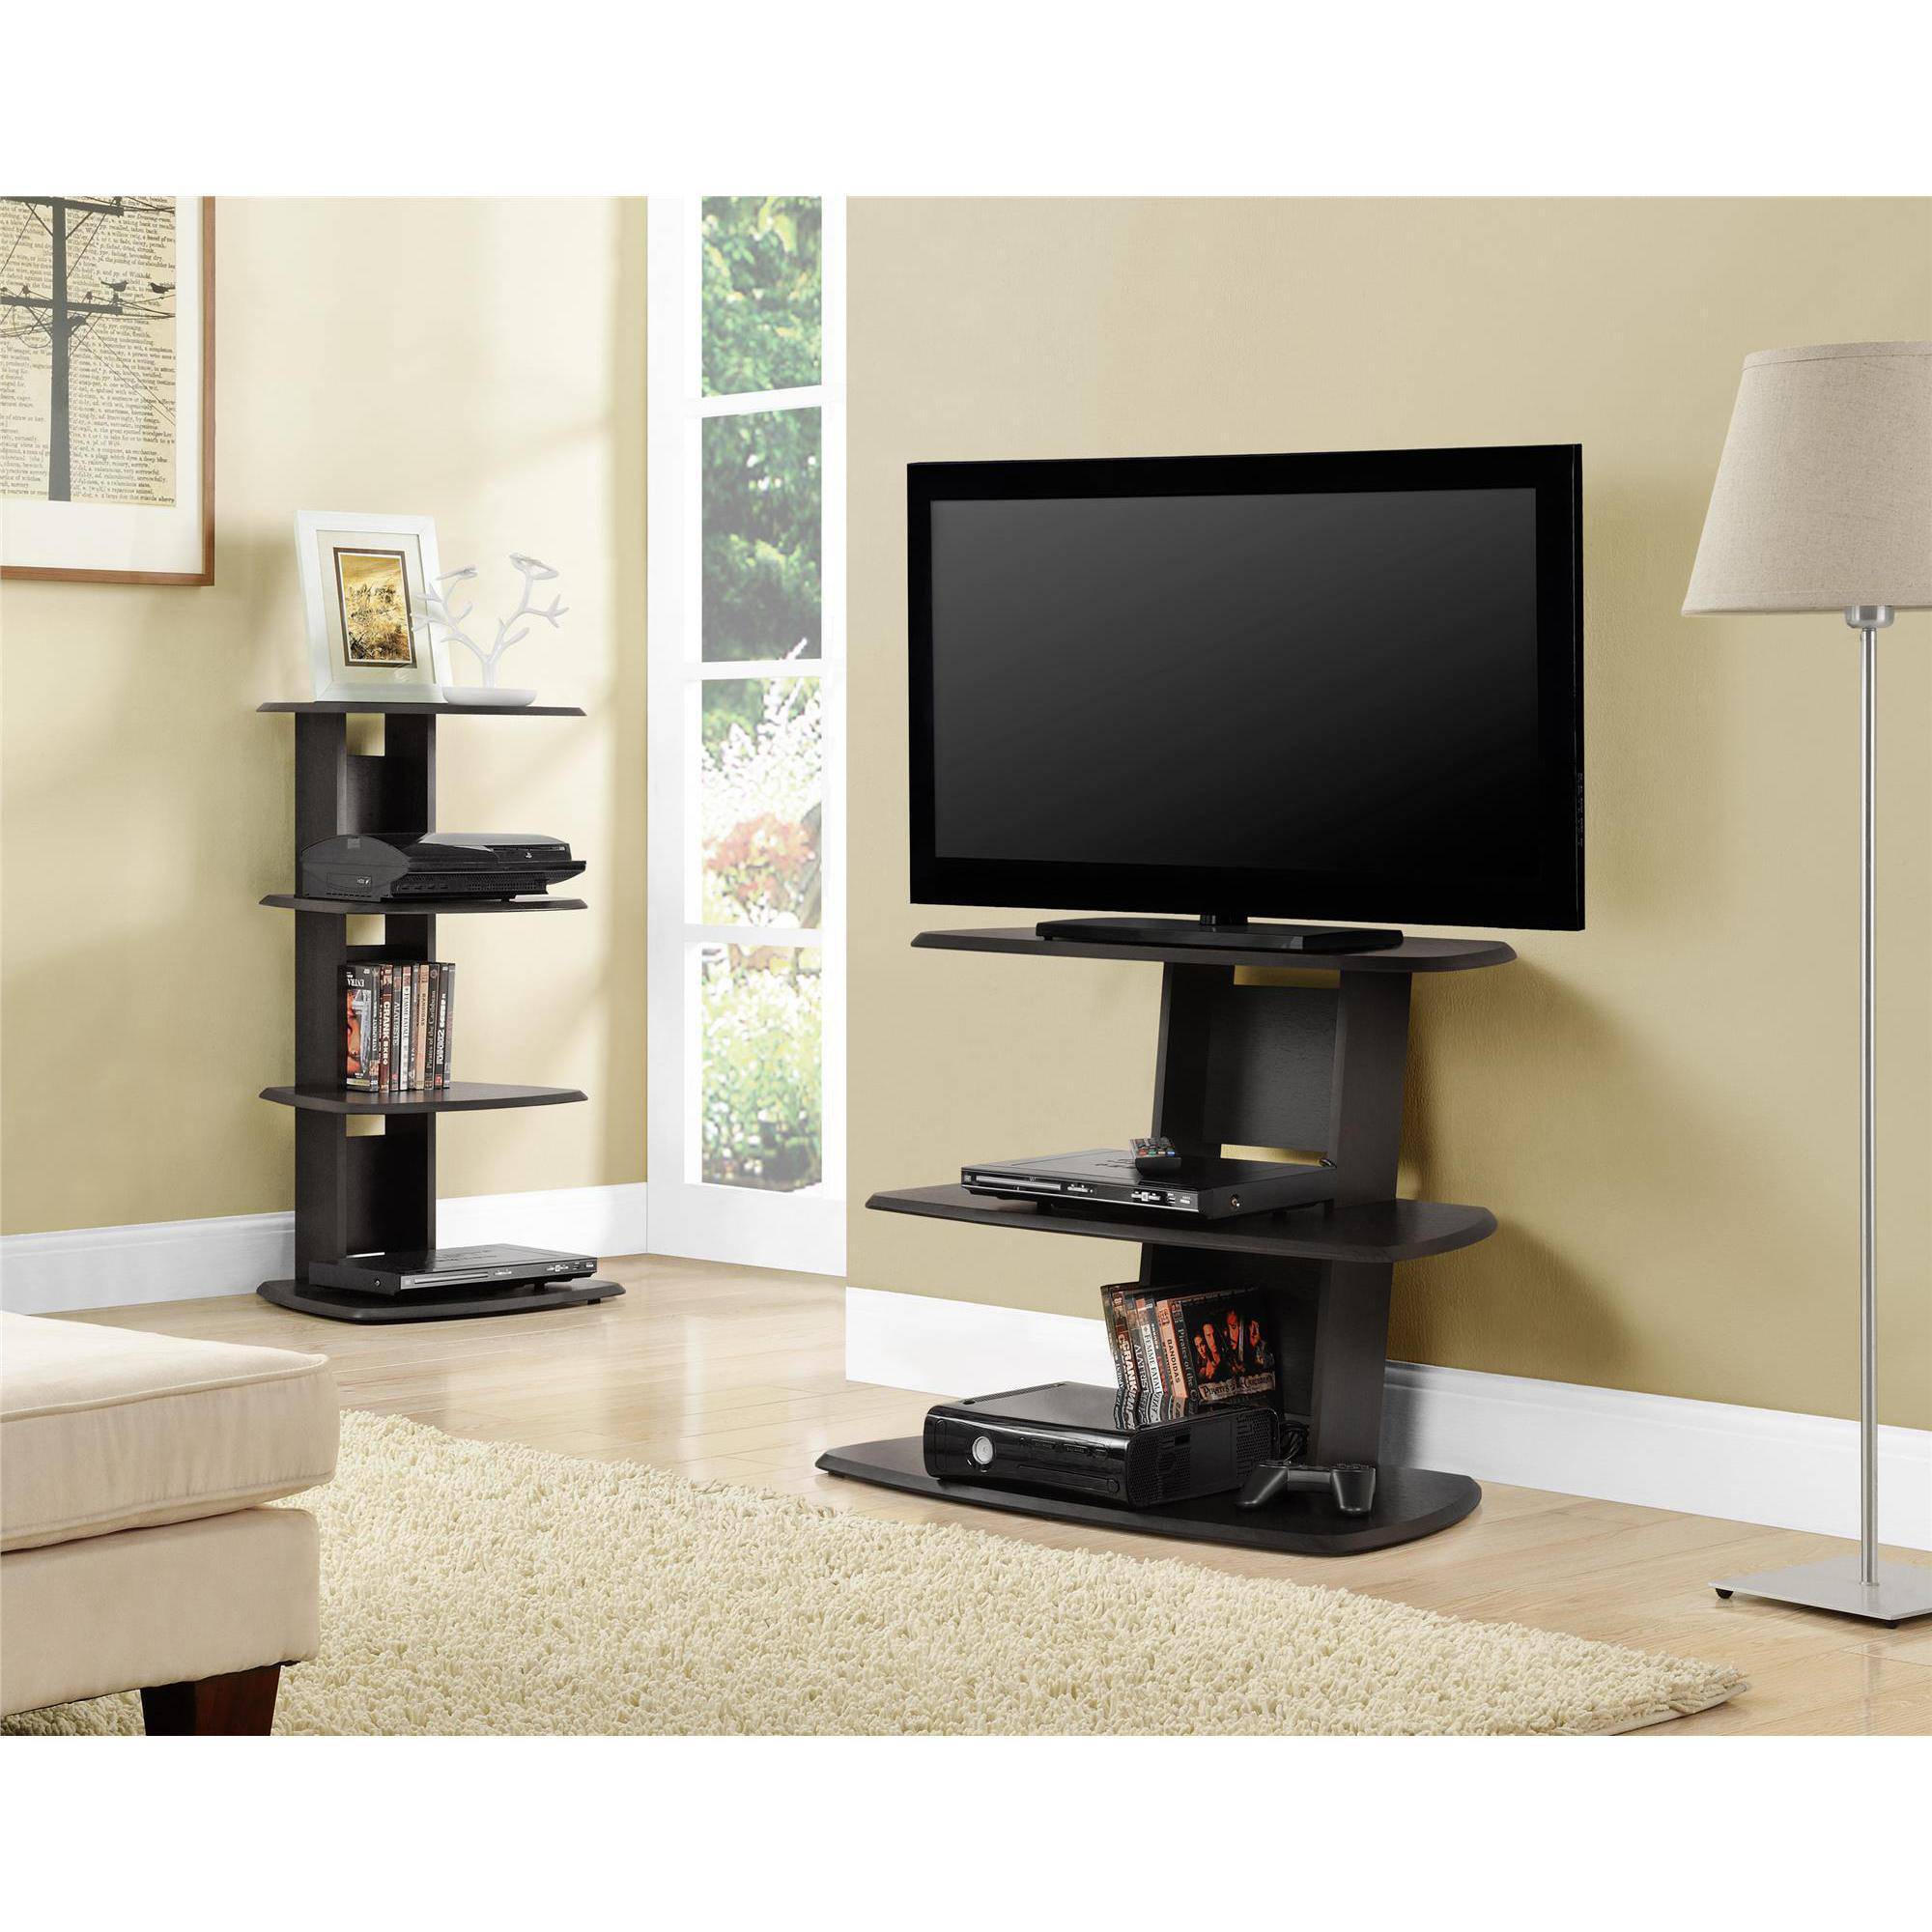 Altra Galaxy II Espresso TV Stand for TVs up to 32''